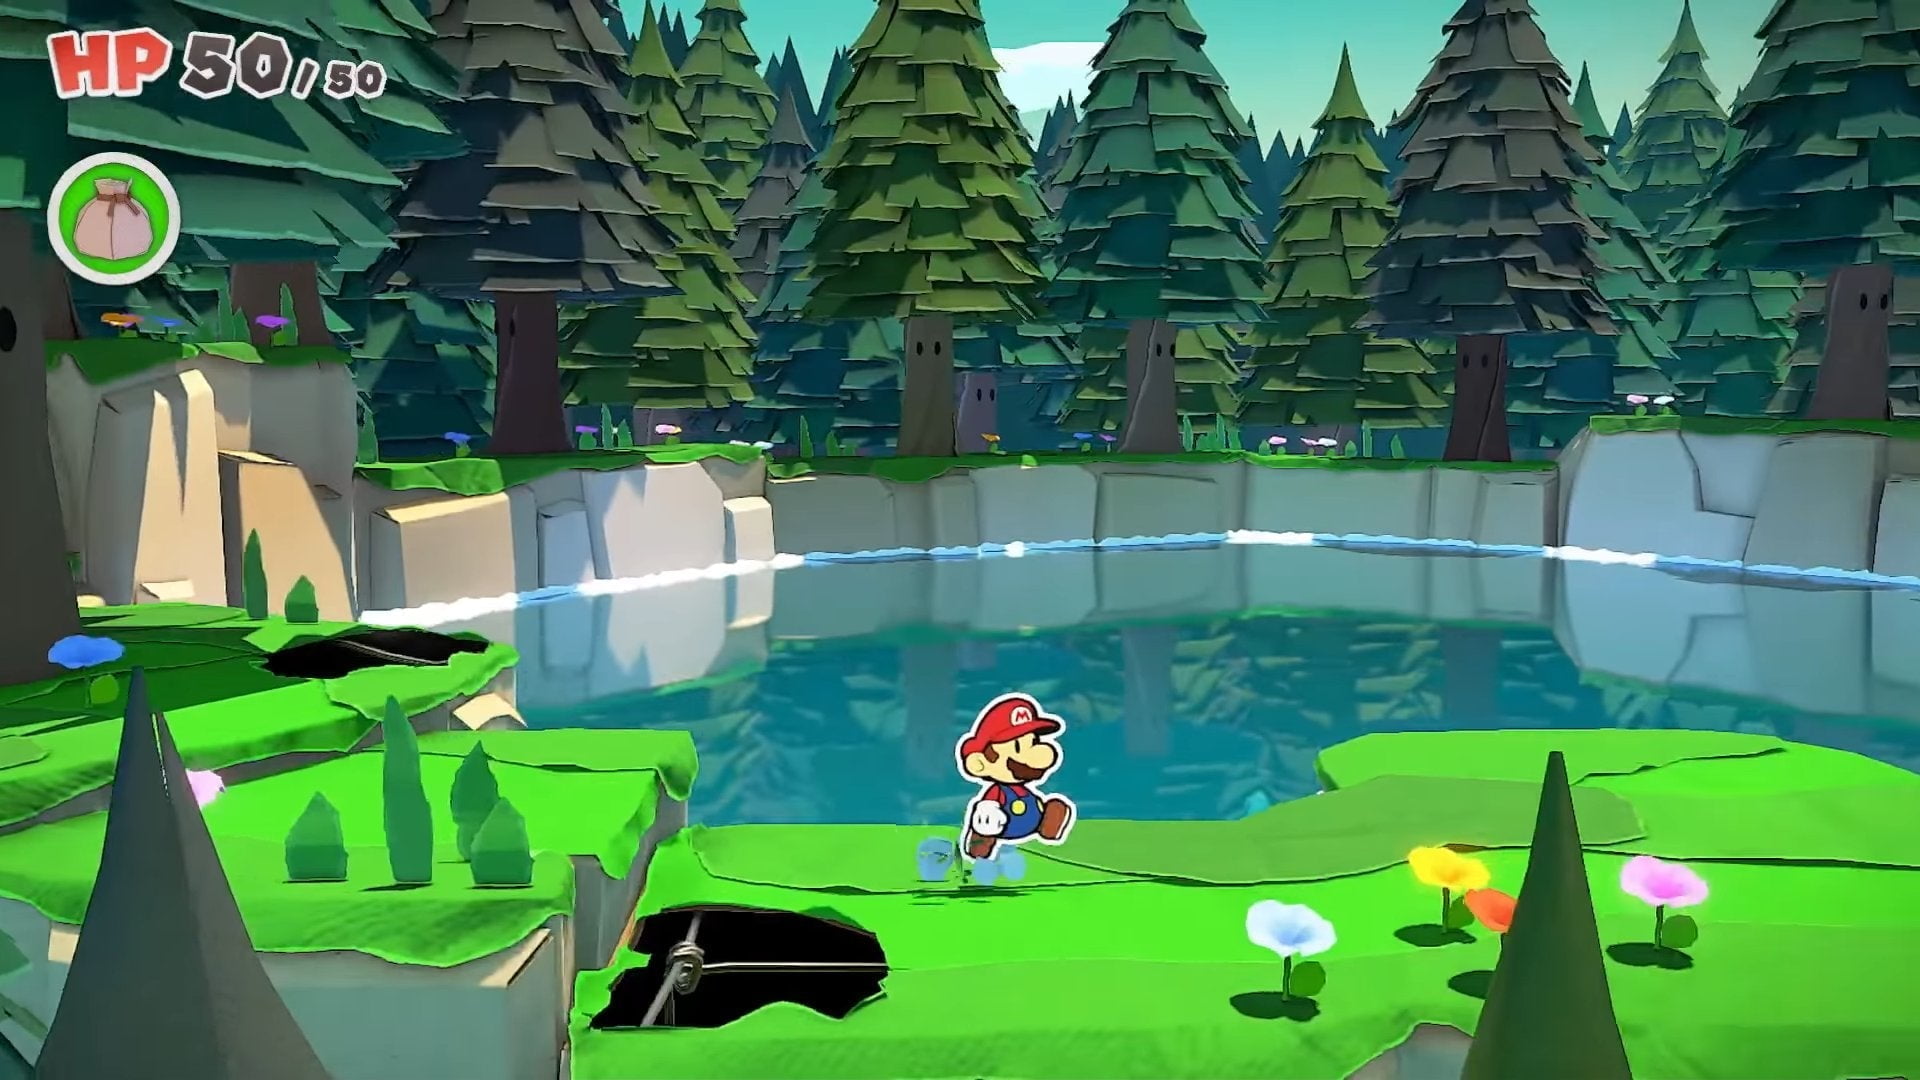 Paper Mario™: The Origami King